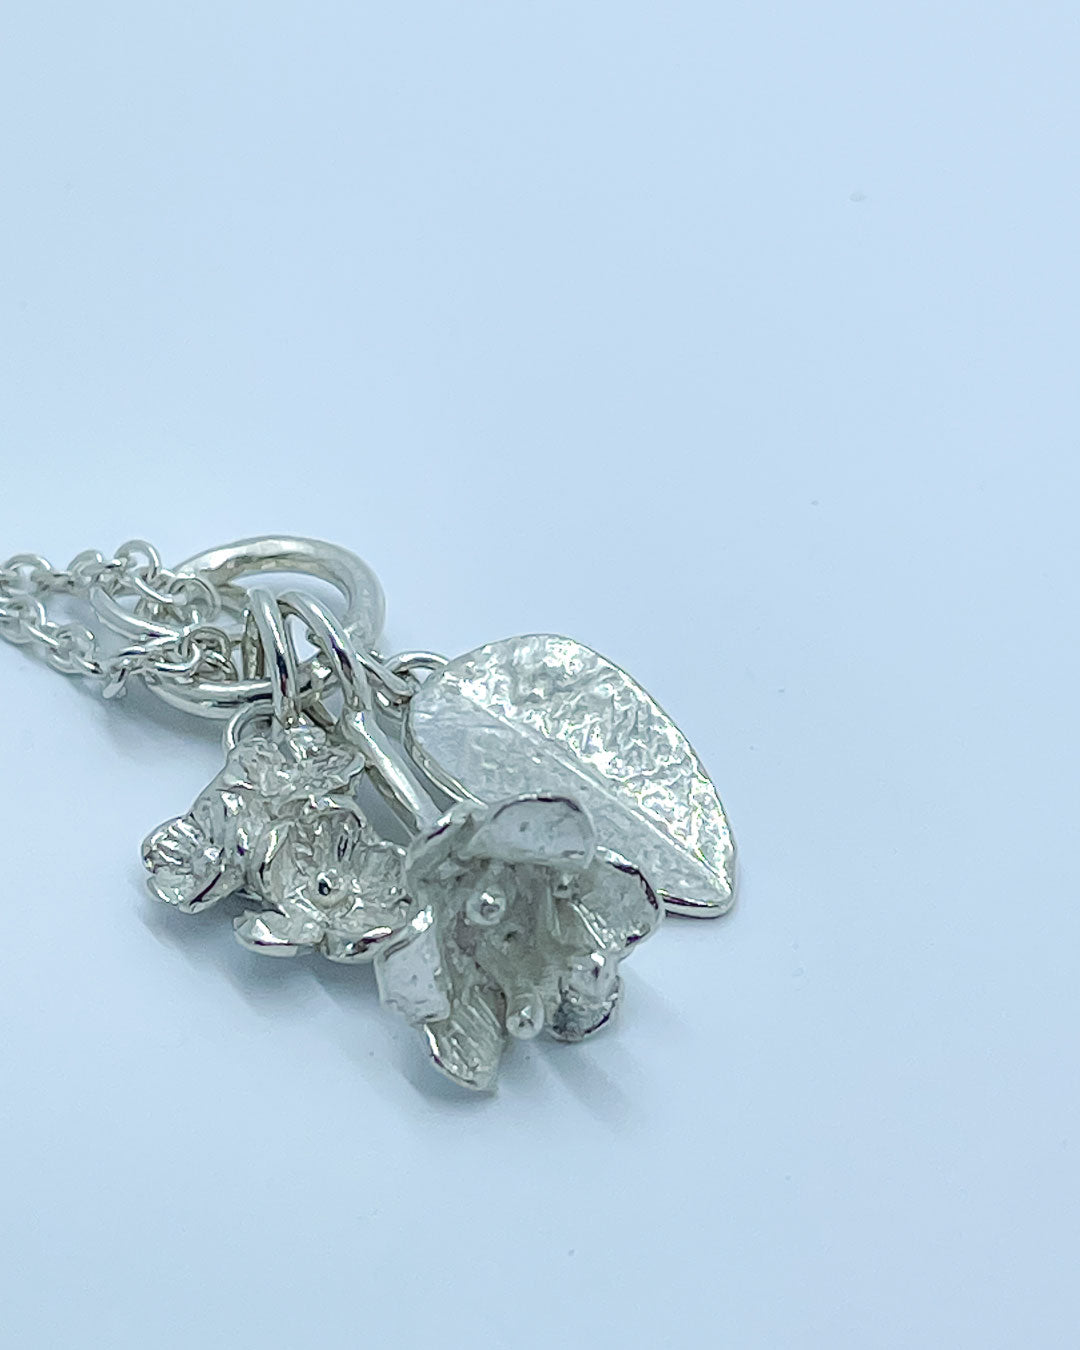 Three Sterling Silver Charms hung from a silver chain - the charms are a bouquet of flowers, a textured leaf and a freesia bloom